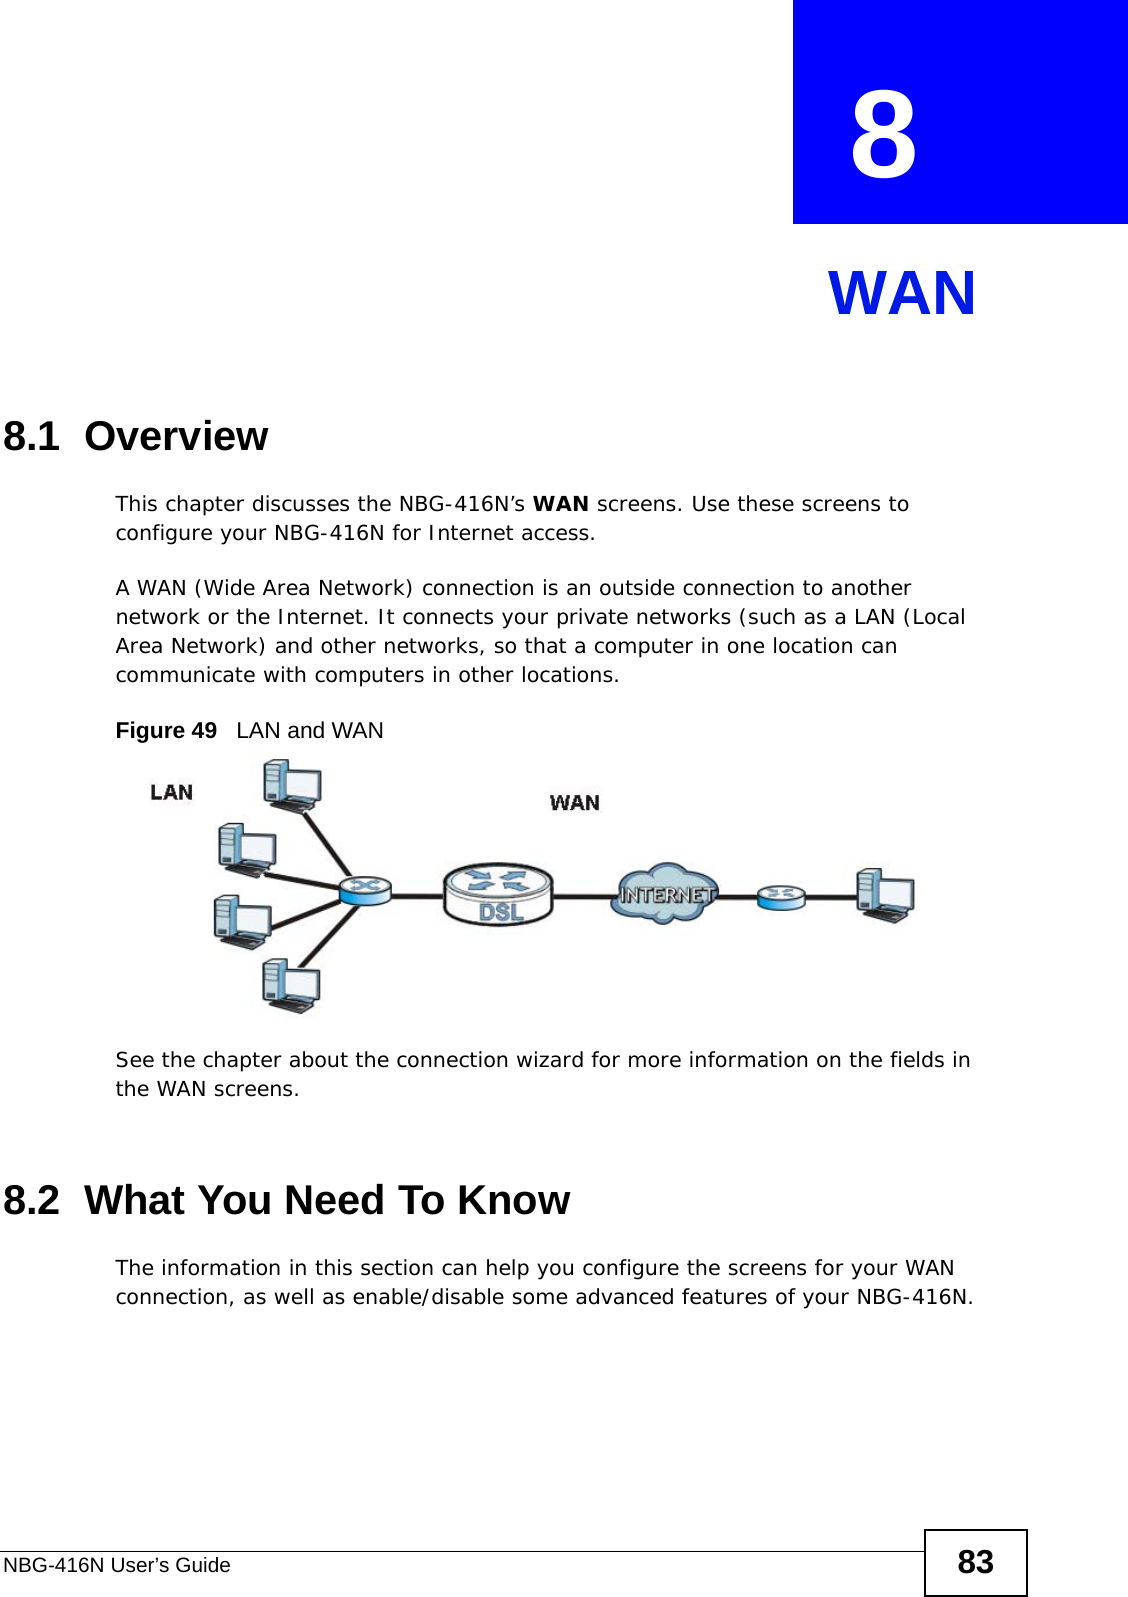 NBG-416N User’s Guide 83CHAPTER  8 WAN8.1  OverviewThis chapter discusses the NBG-416N’s WAN screens. Use these screens to configure your NBG-416N for Internet access.A WAN (Wide Area Network) connection is an outside connection to another network or the Internet. It connects your private networks (such as a LAN (Local Area Network) and other networks, so that a computer in one location can communicate with computers in other locations.Figure 49   LAN and WANSee the chapter about the connection wizard for more information on the fields in the WAN screens.8.2  What You Need To KnowThe information in this section can help you configure the screens for your WAN connection, as well as enable/disable some advanced features of your NBG-416N.